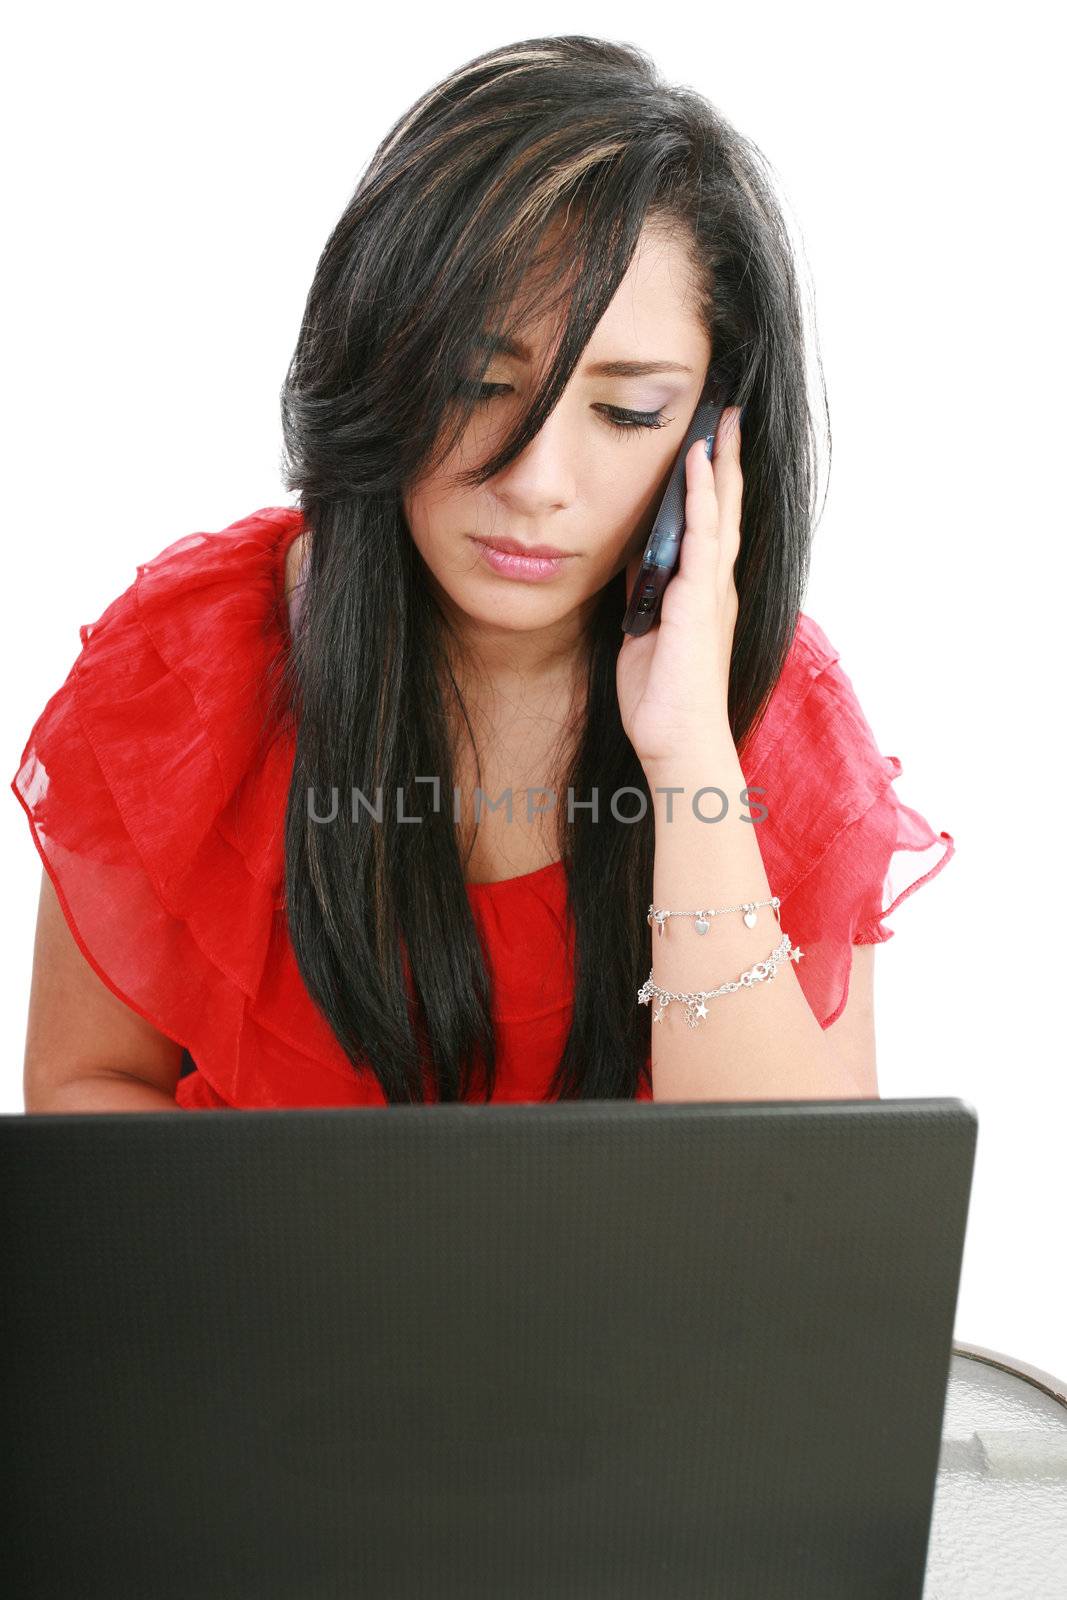 Serious business woman looking at laptop screen while talking on the phone at her work desk, isolated on white background